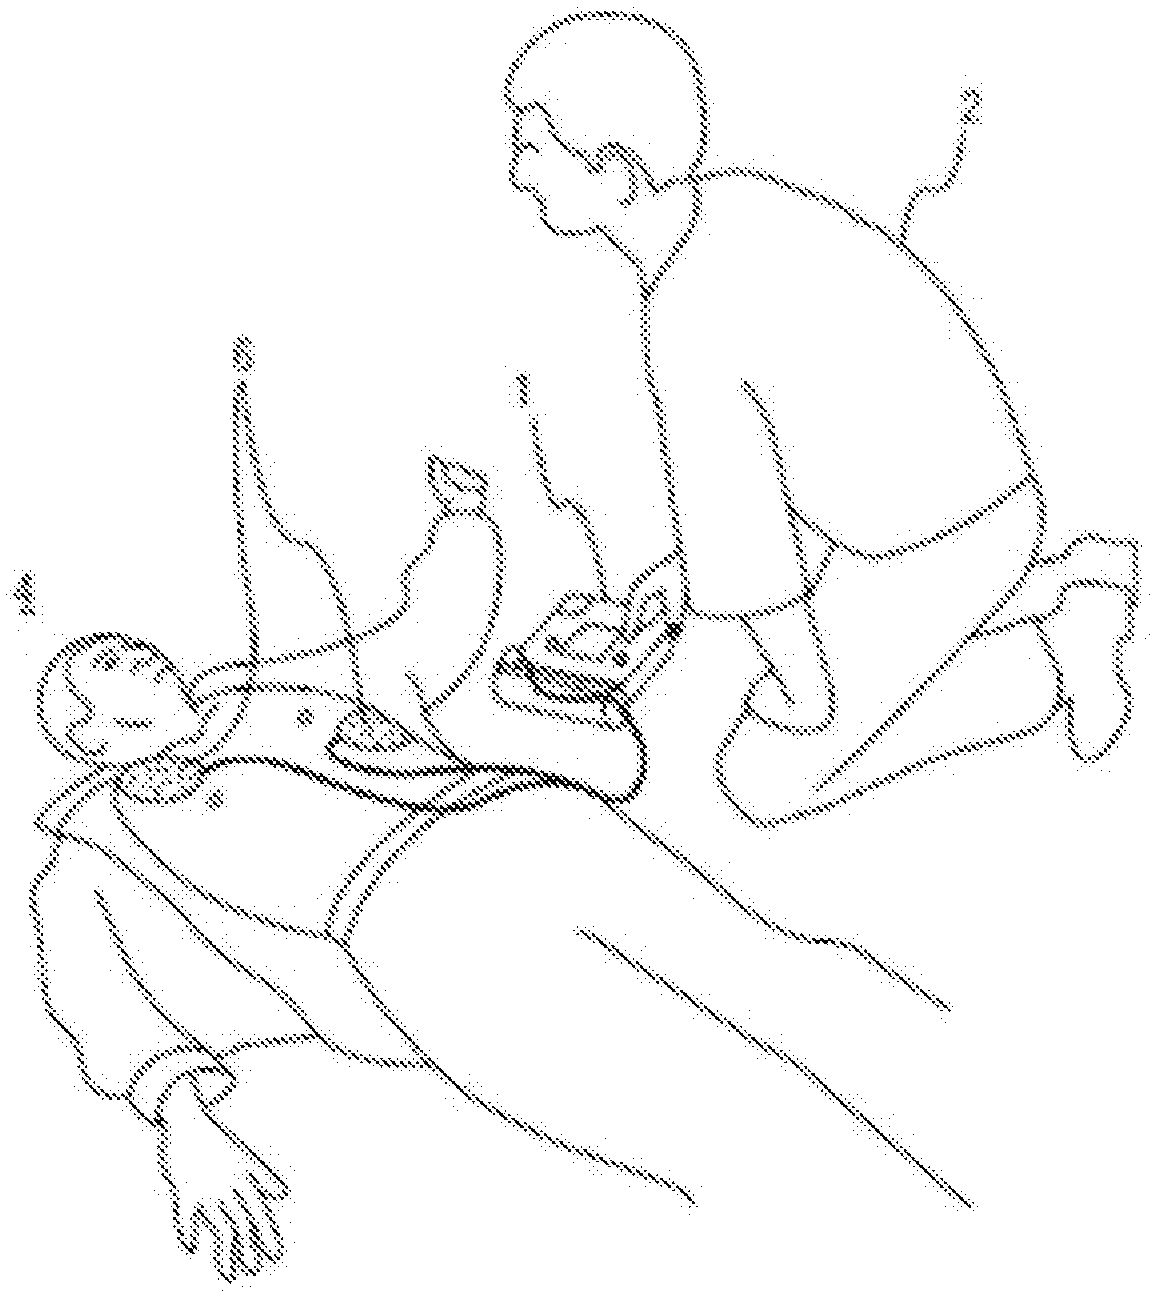 Apparatus for reversing a shock decision in an automated external defibrillator